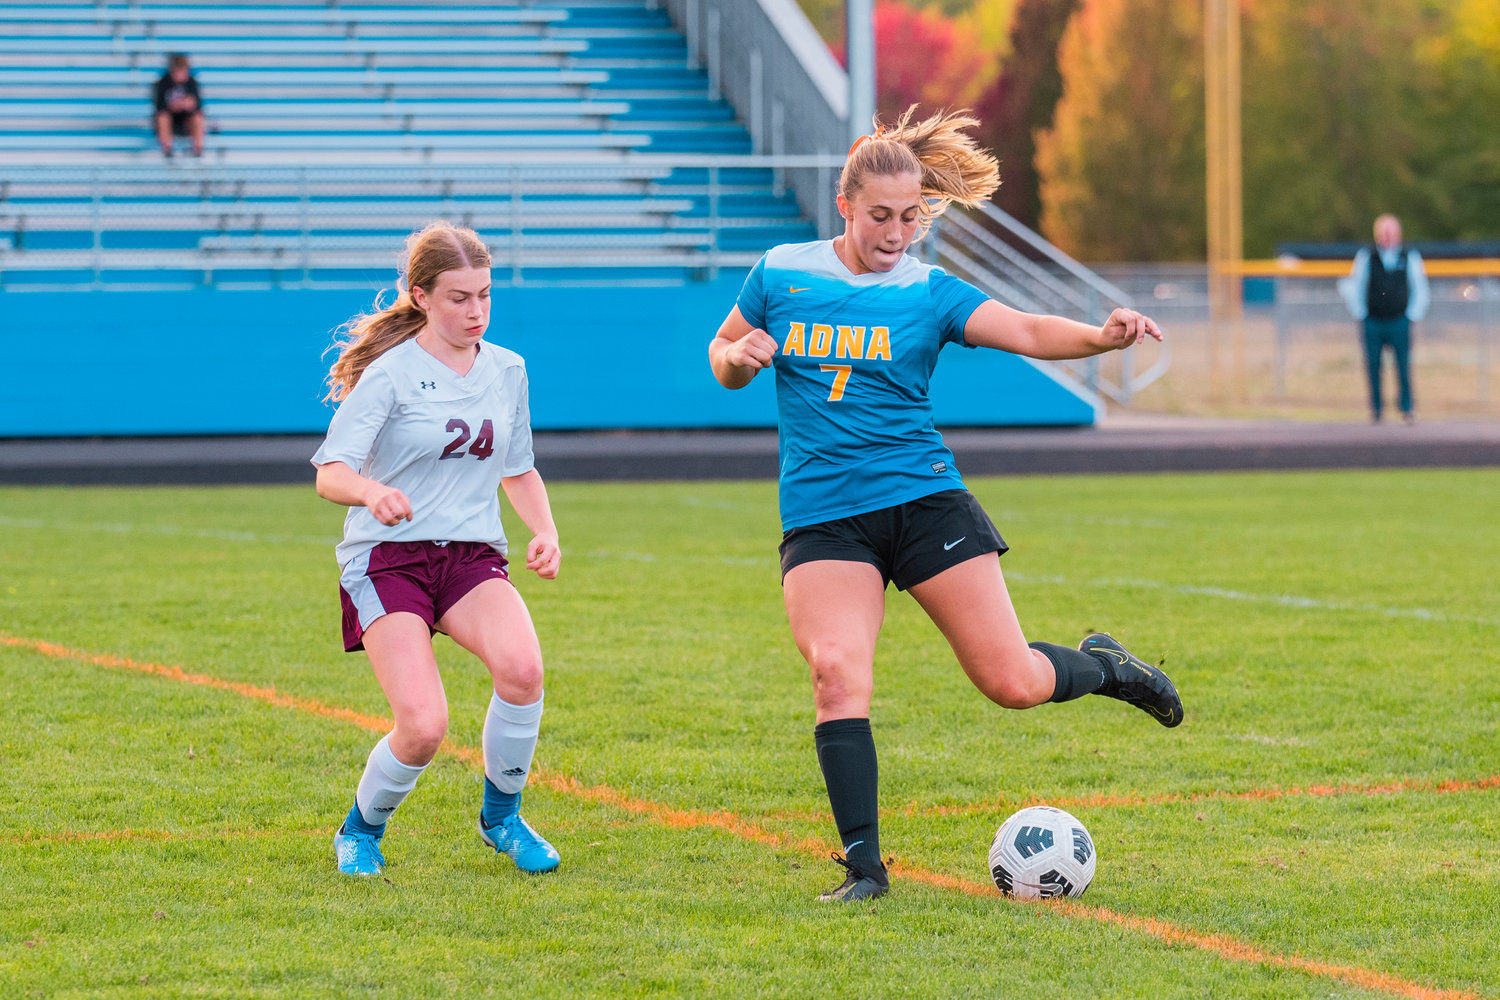 FILE PHOTO - Pirates’ Karlee VonMoos (7) prepares to pass during a game against Stevenson Sept. 22 in Adna.